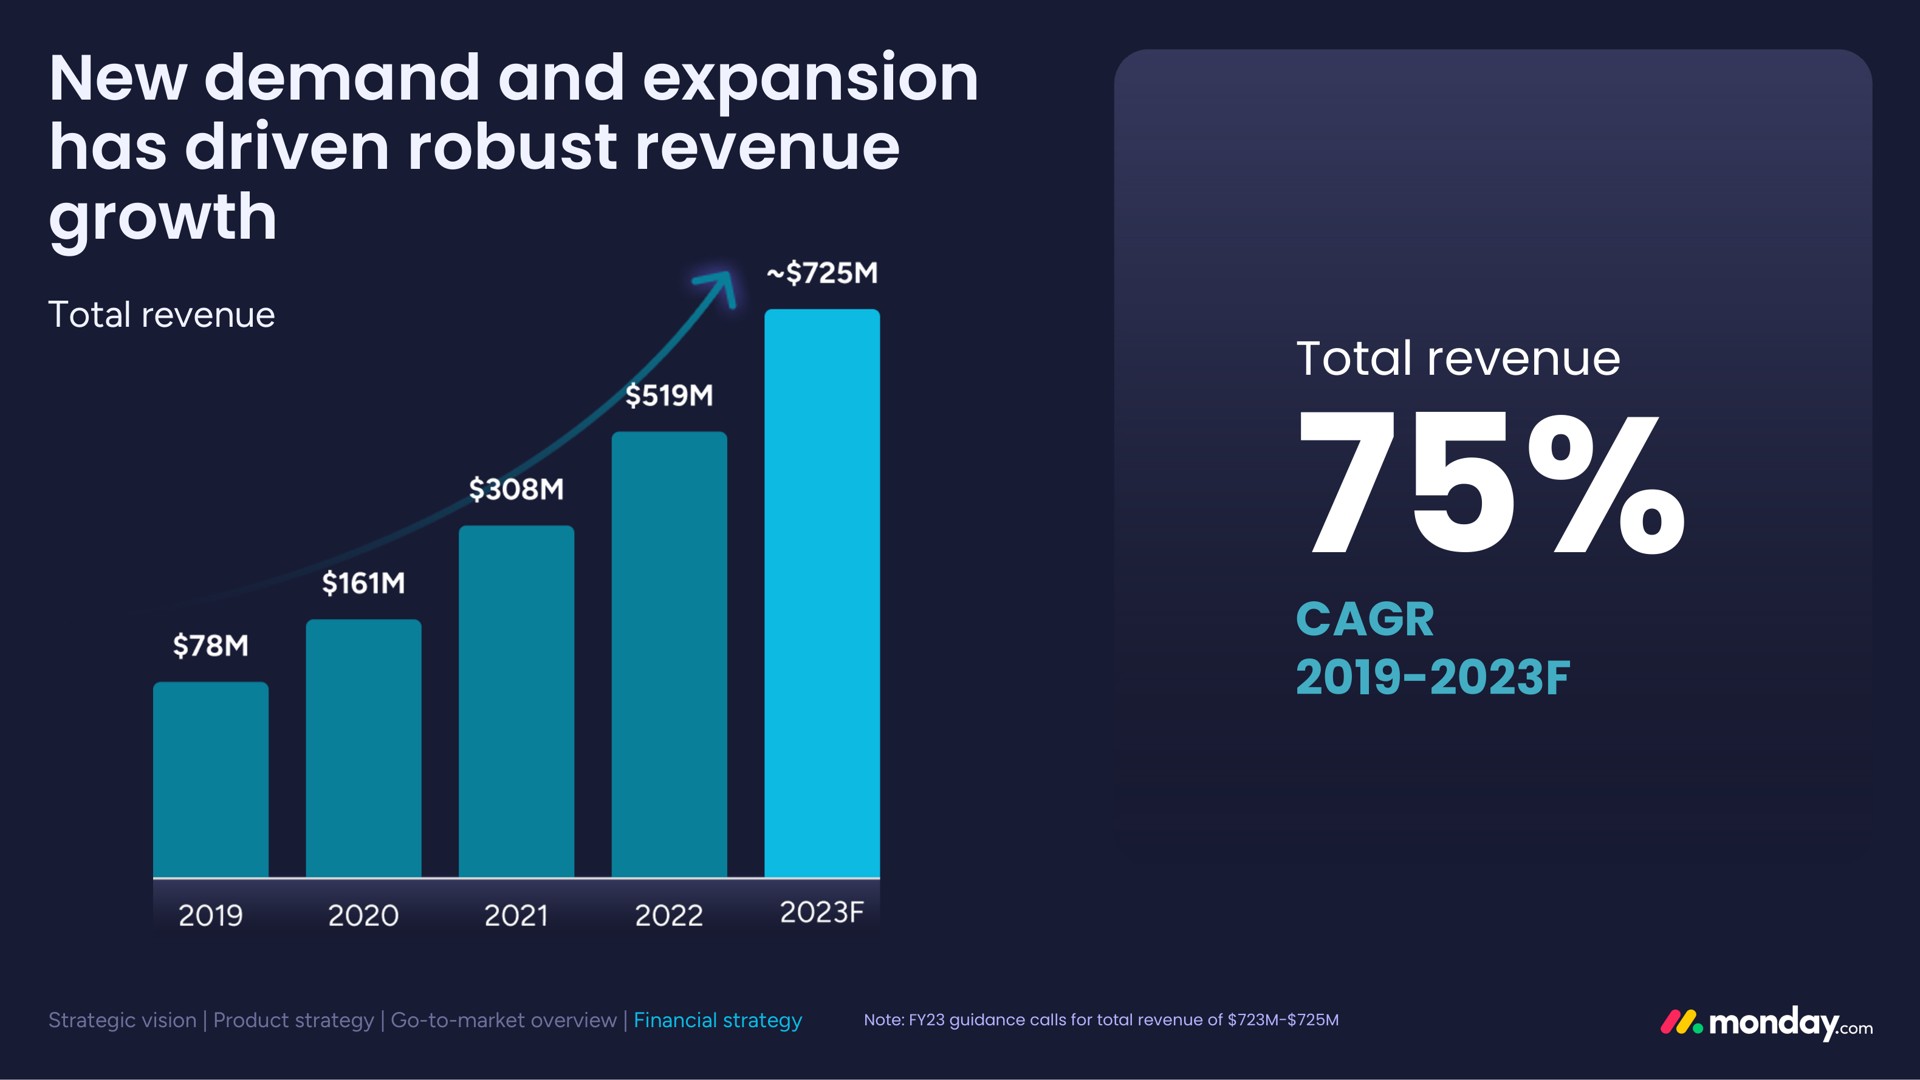 new demand and expansion has driven robust revenue growth | monday.com